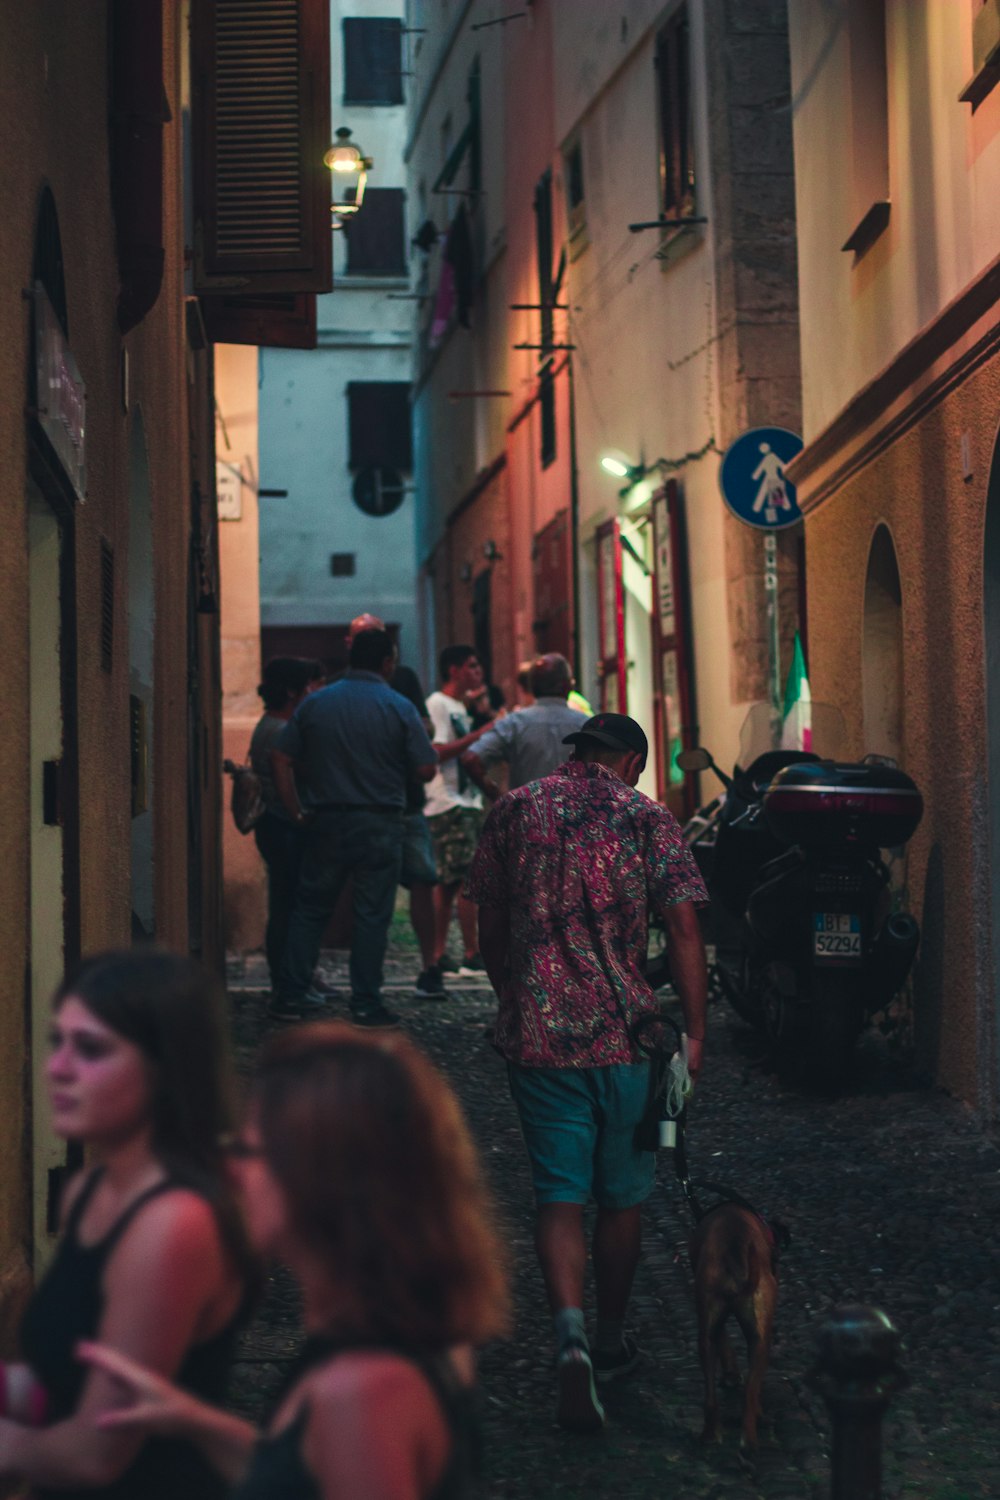 a group of people walking down a narrow alley way